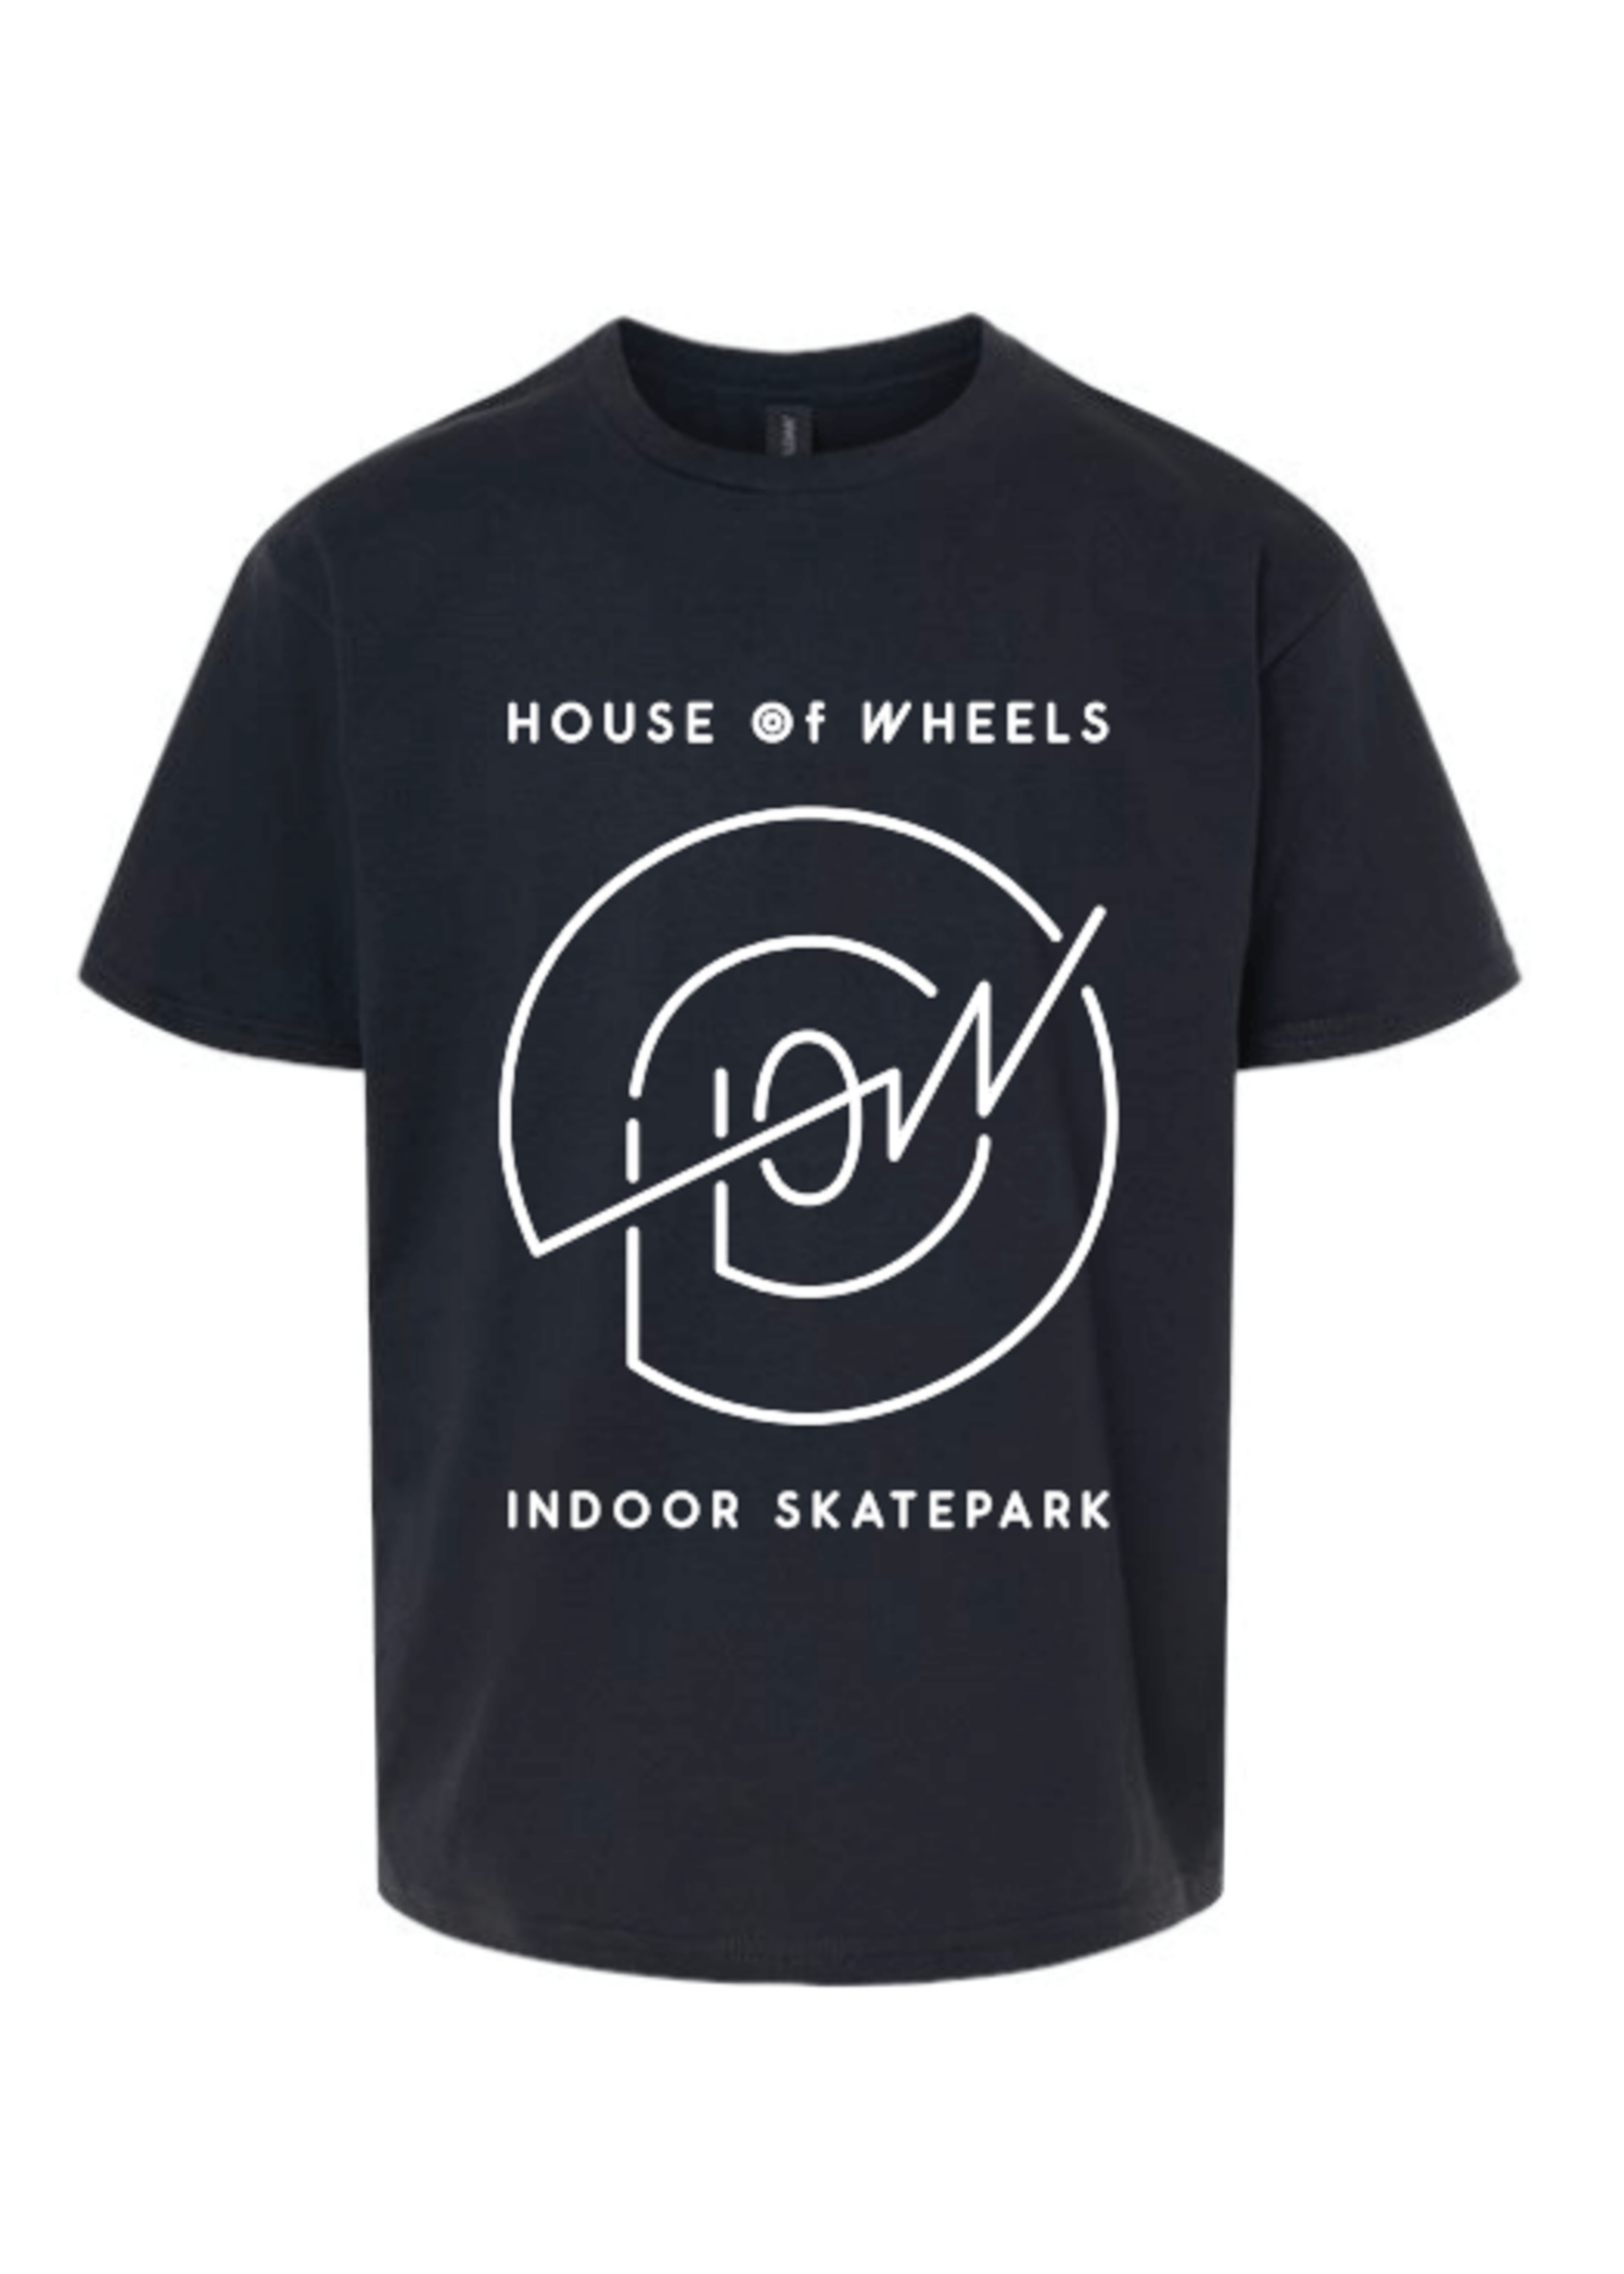 House of Wheels HOW - T-shirt Indoor skatepark crest - Youth